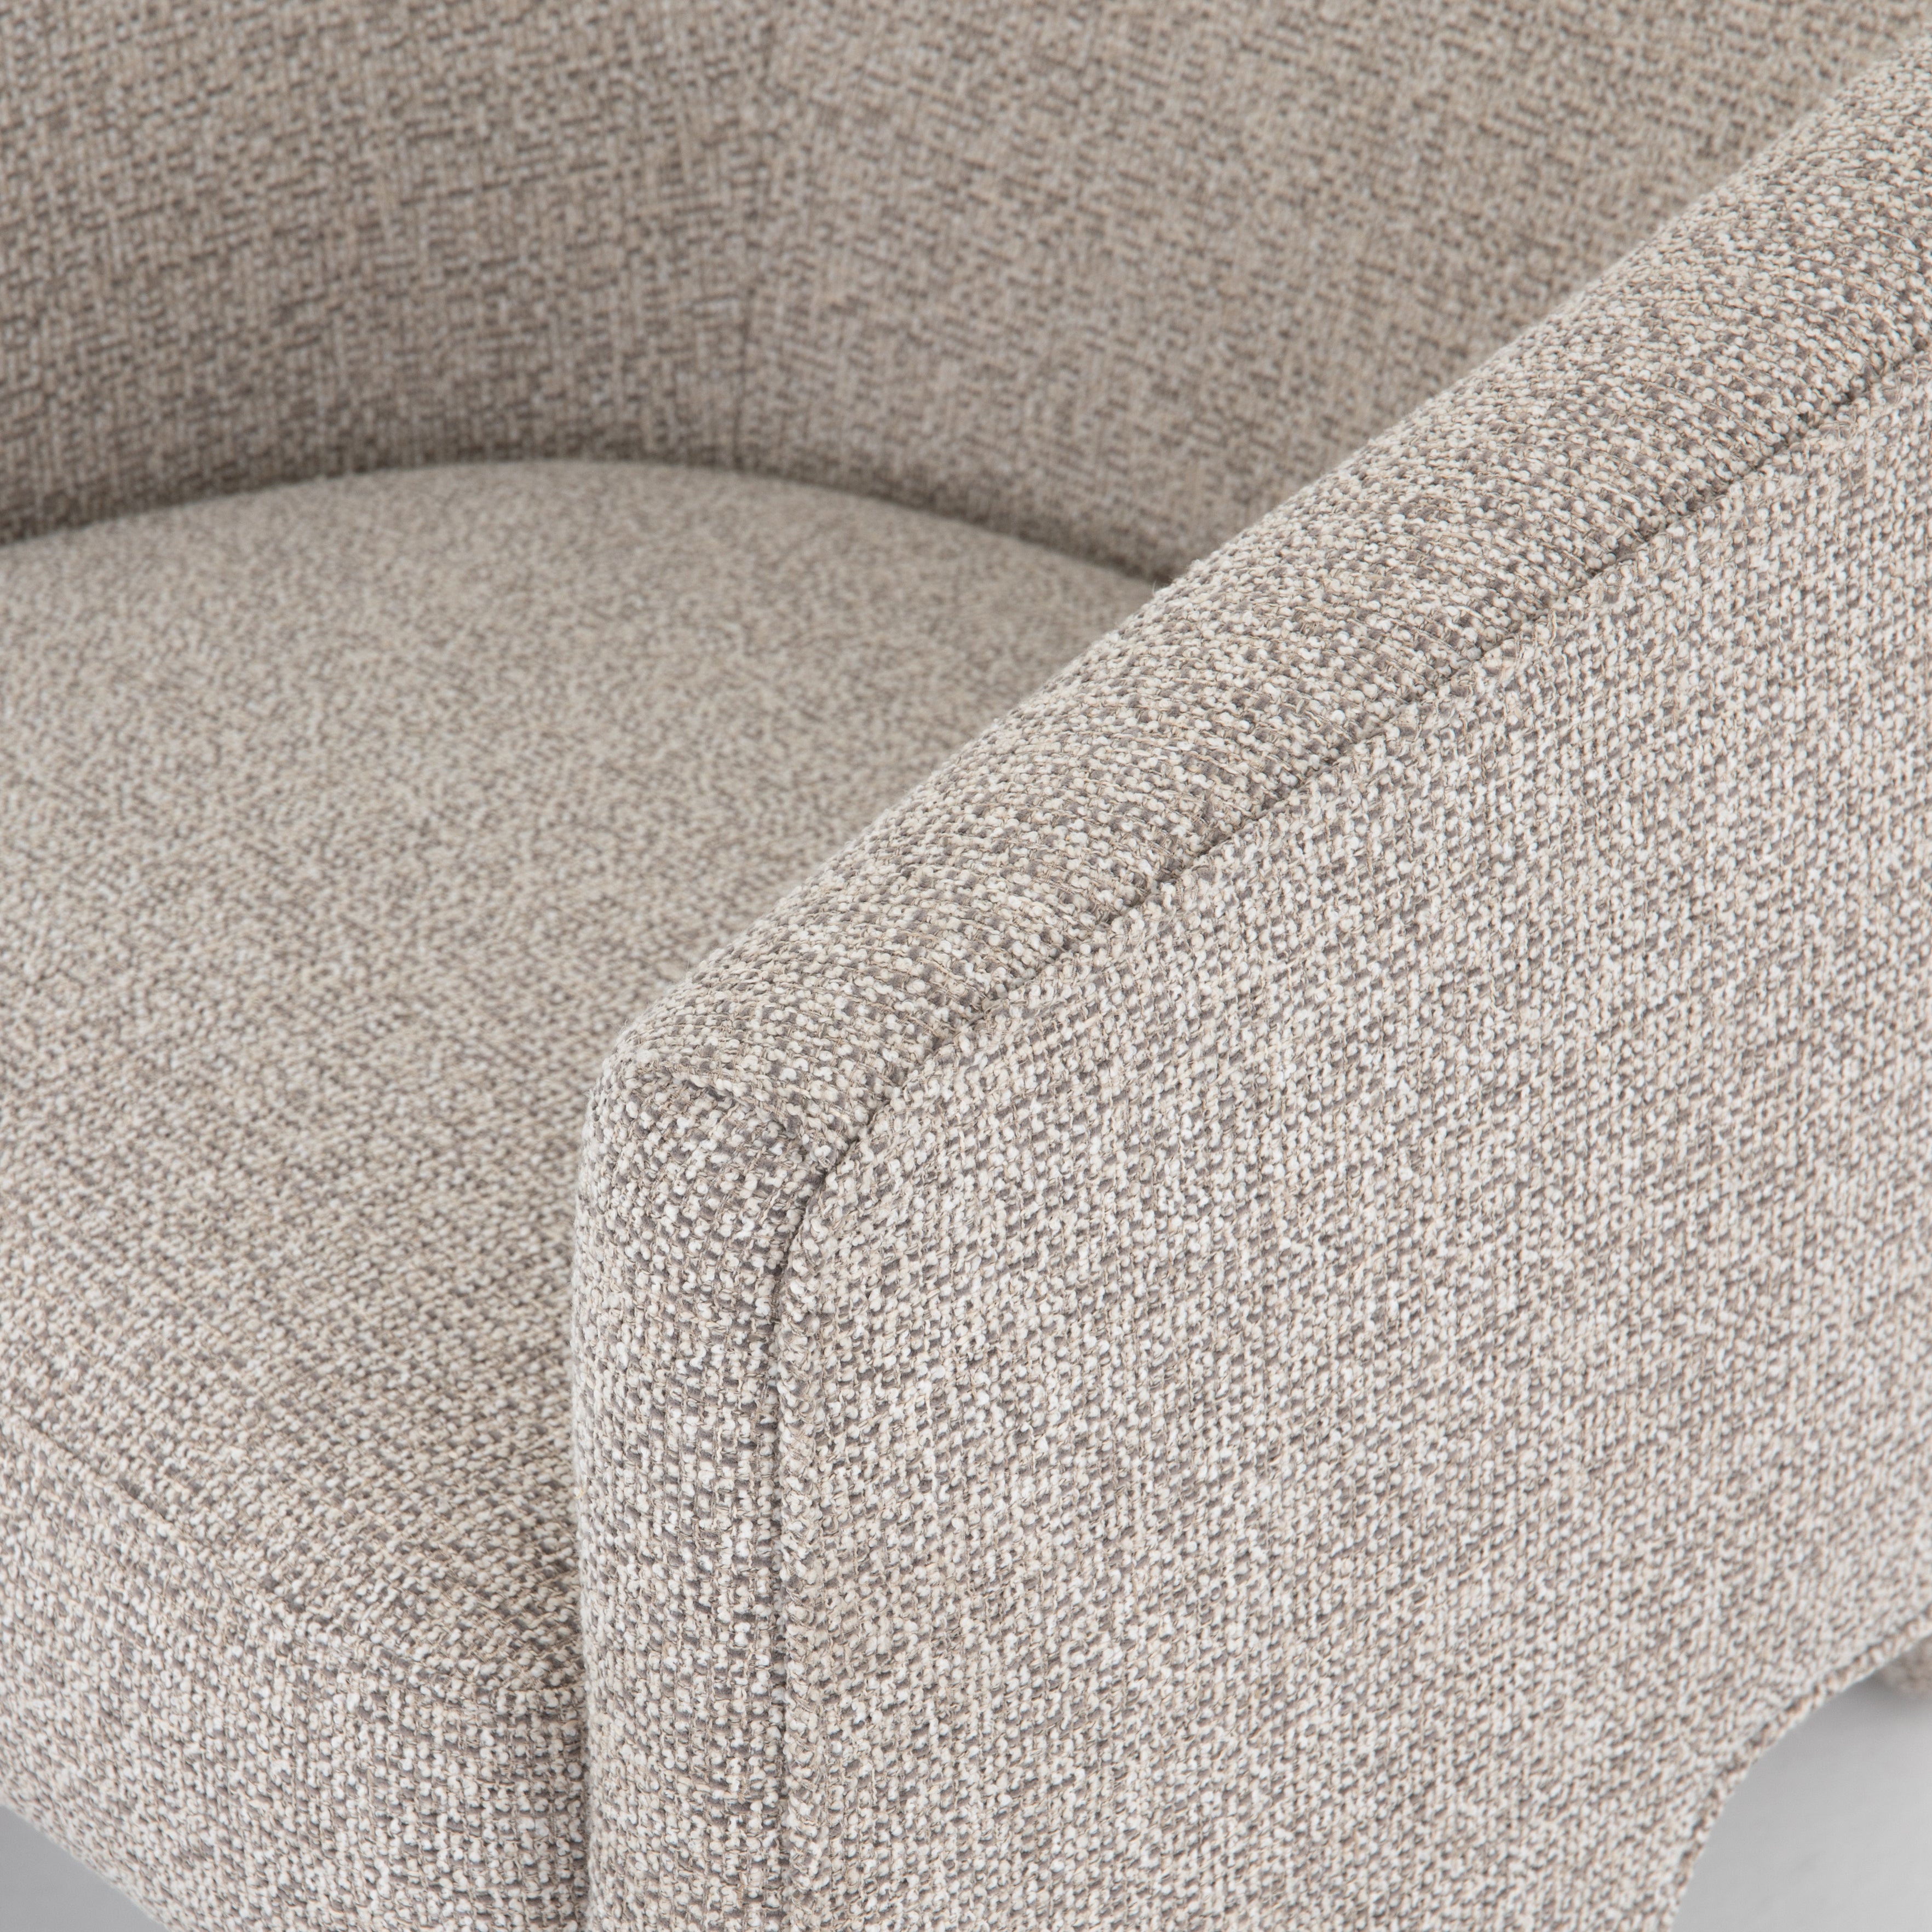 This Fae Chair - Bellamy Storm is well-tailored and stylistically unique. The Italian boucle lends a high-fashion feel to a cleverly constructed three-legged design.  Overall Dimensions: 30.25"w x 29.50"d x 29.50"h